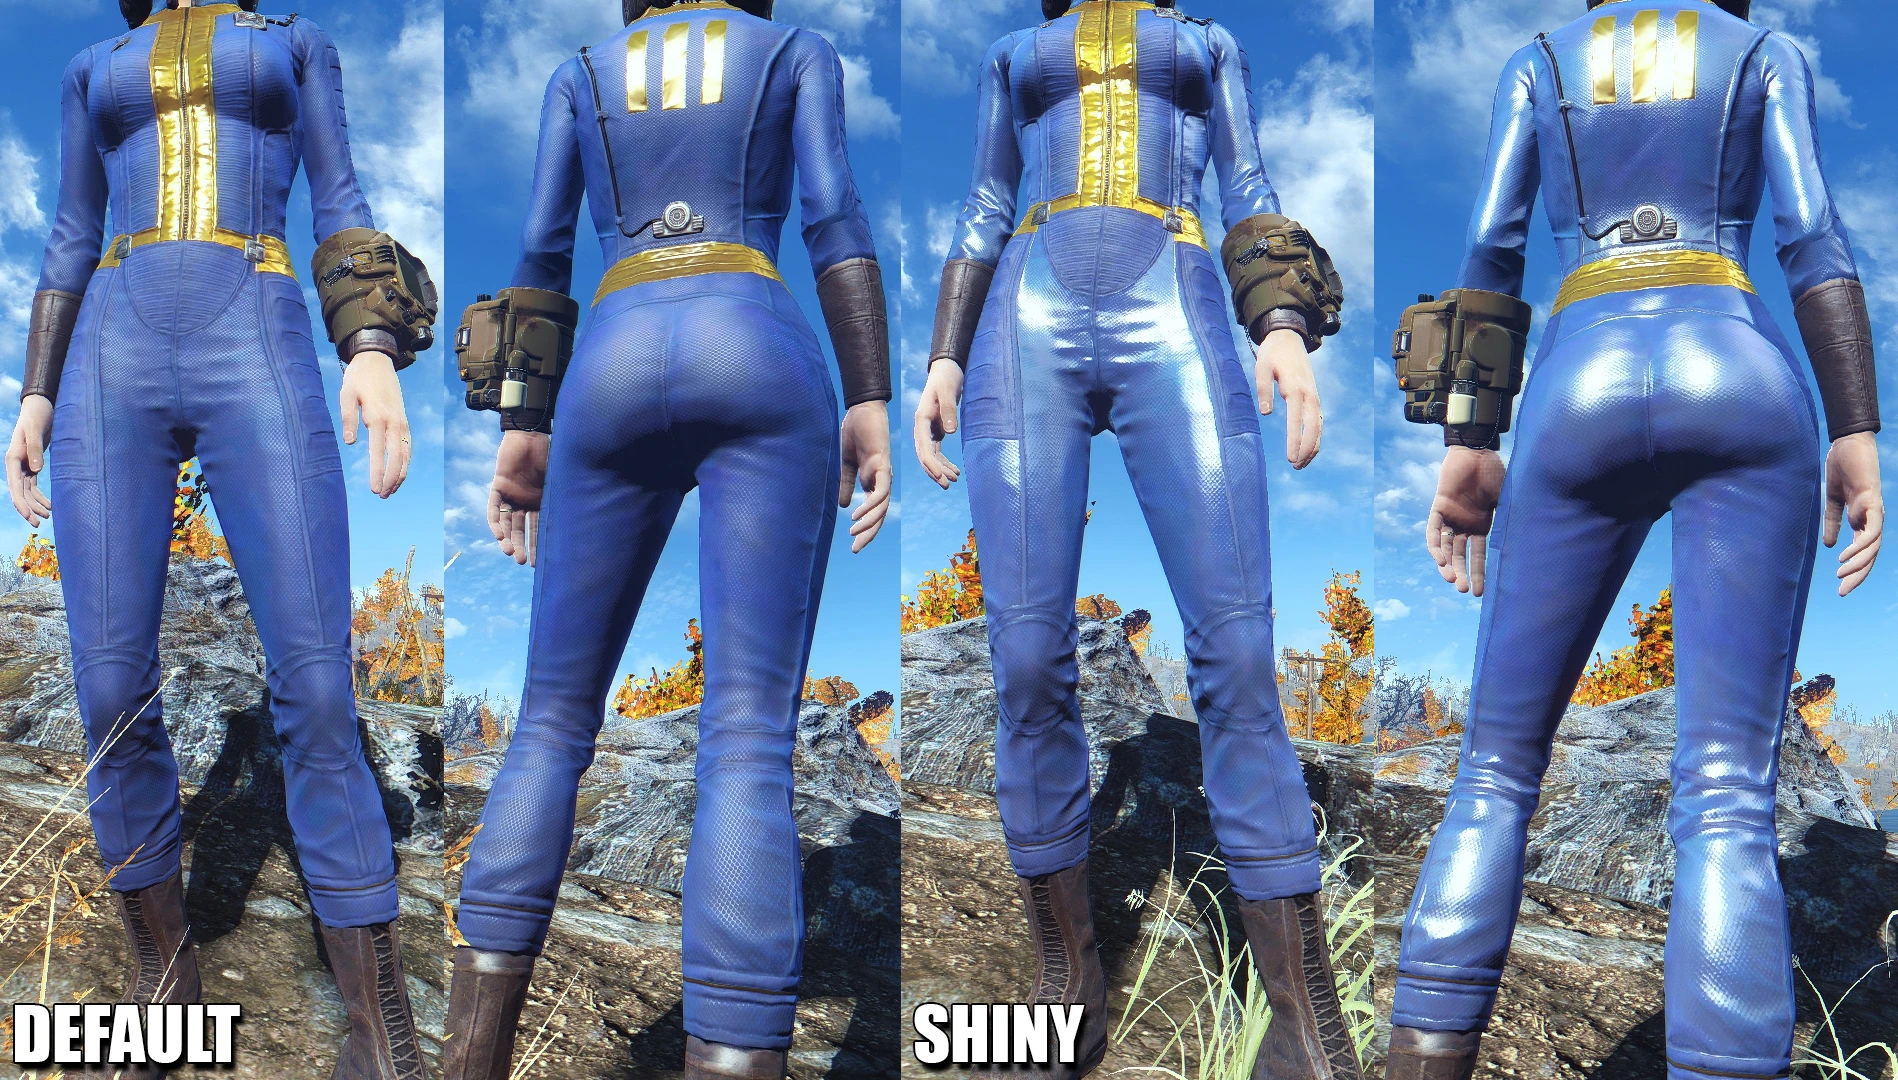 More Shiny Vault Suit At Fallout 4 Nexus Mods And Community.